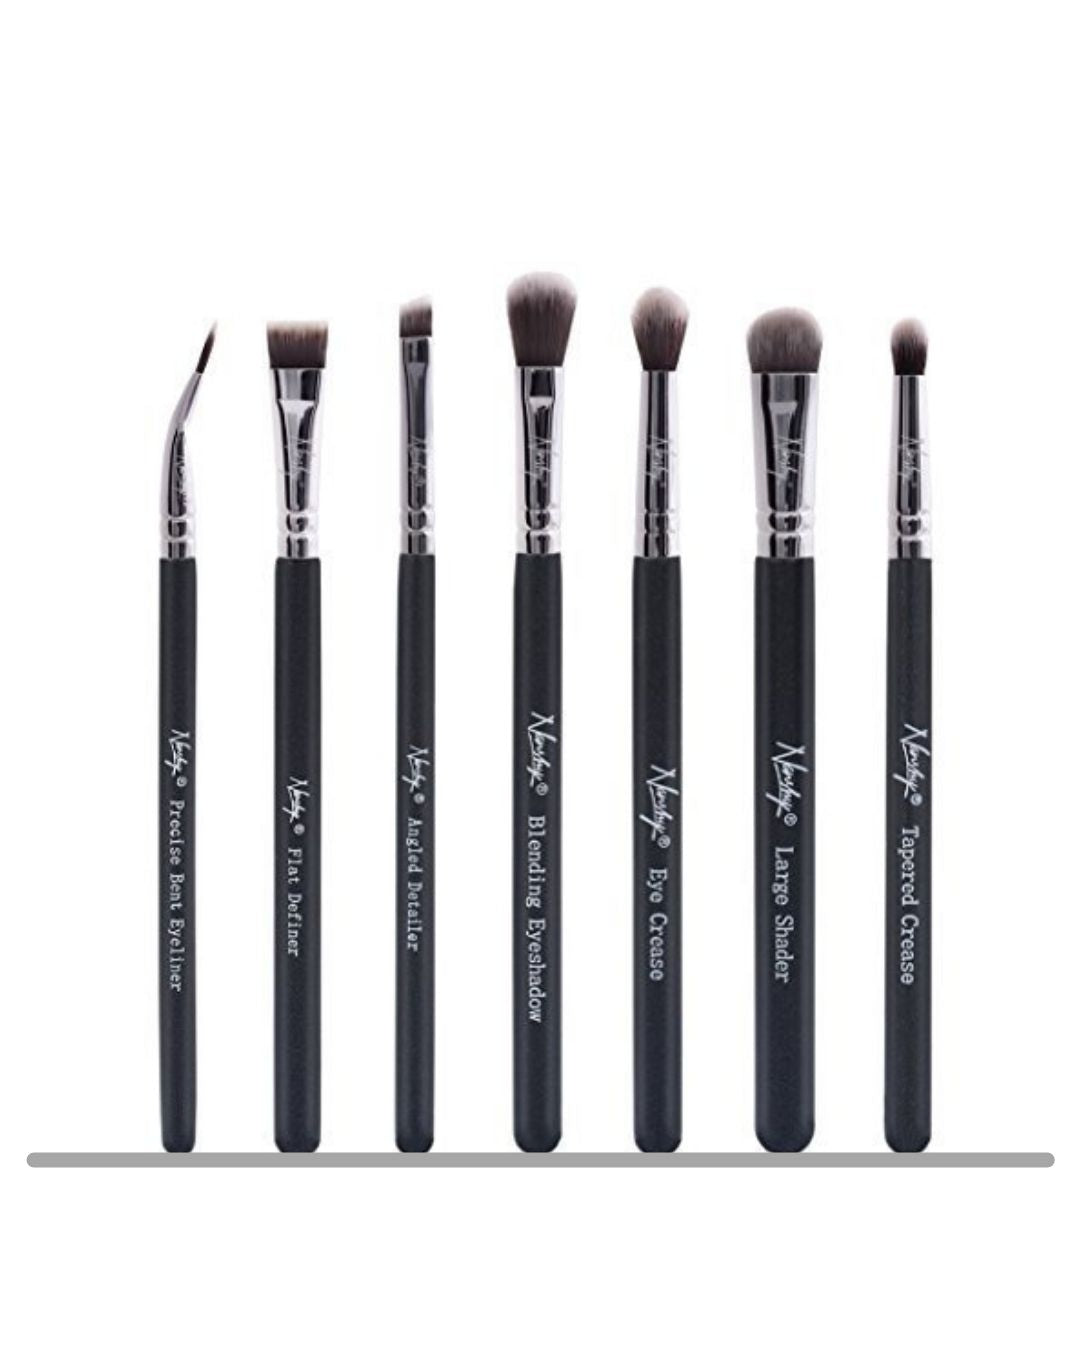 28 Ultimate Face and Eyes Makeup Brush Set With Pouch